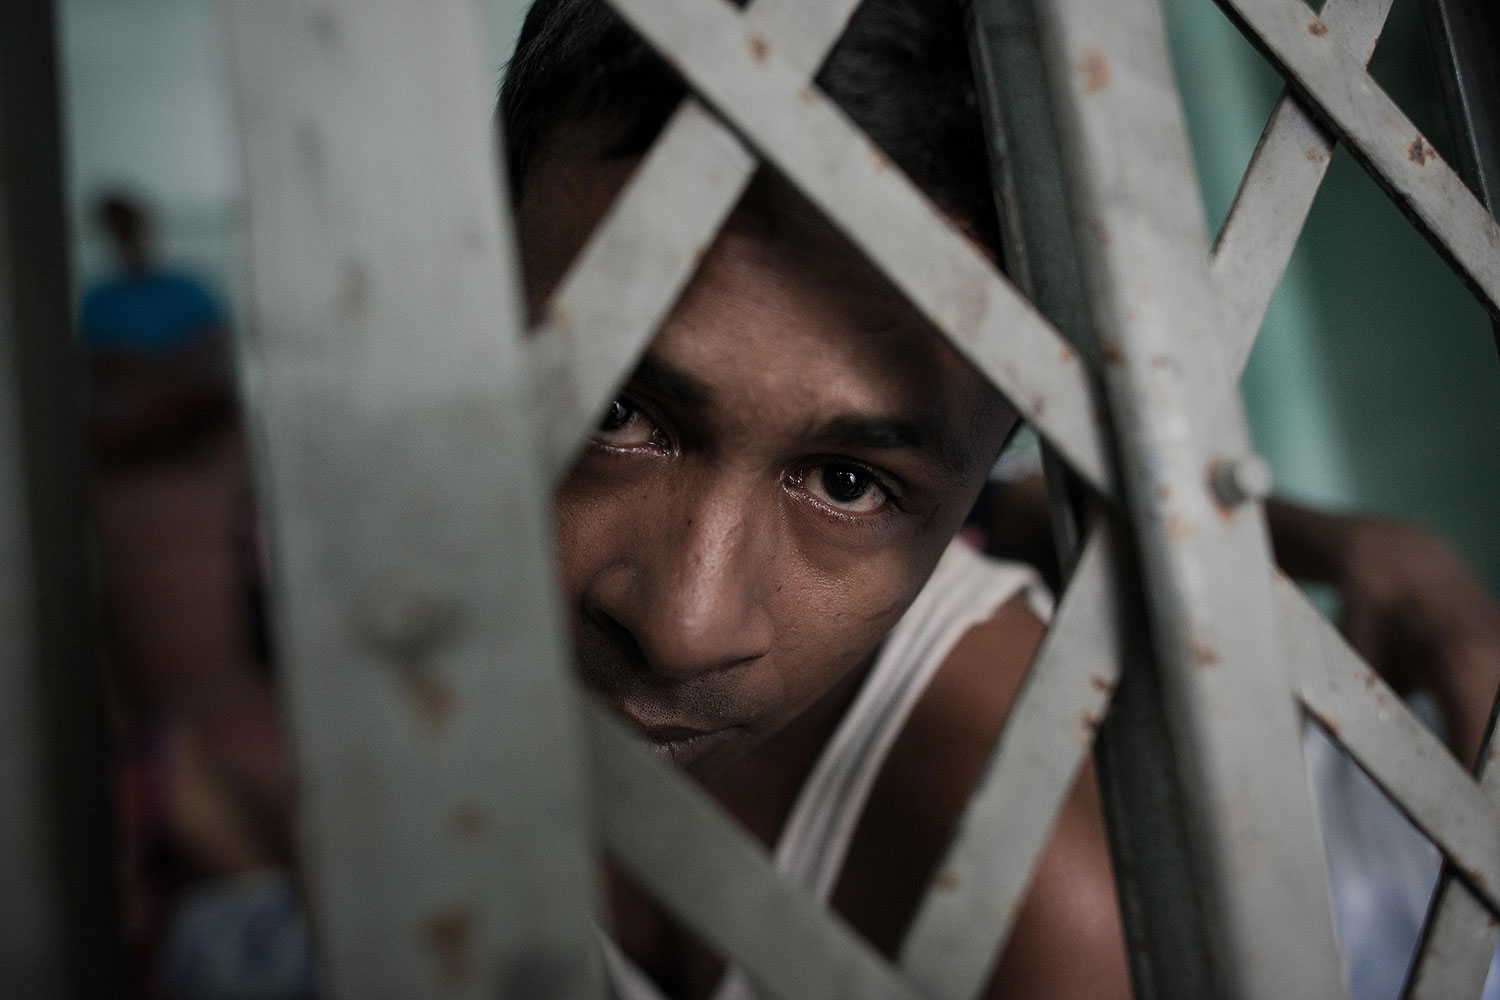 A Muslim Rohingha asylum seeker stands inside a cell at the Thai immigration detention centre in Phangnga, southern Thailand (Nicolas Asfouri—AFP/Getty Images)